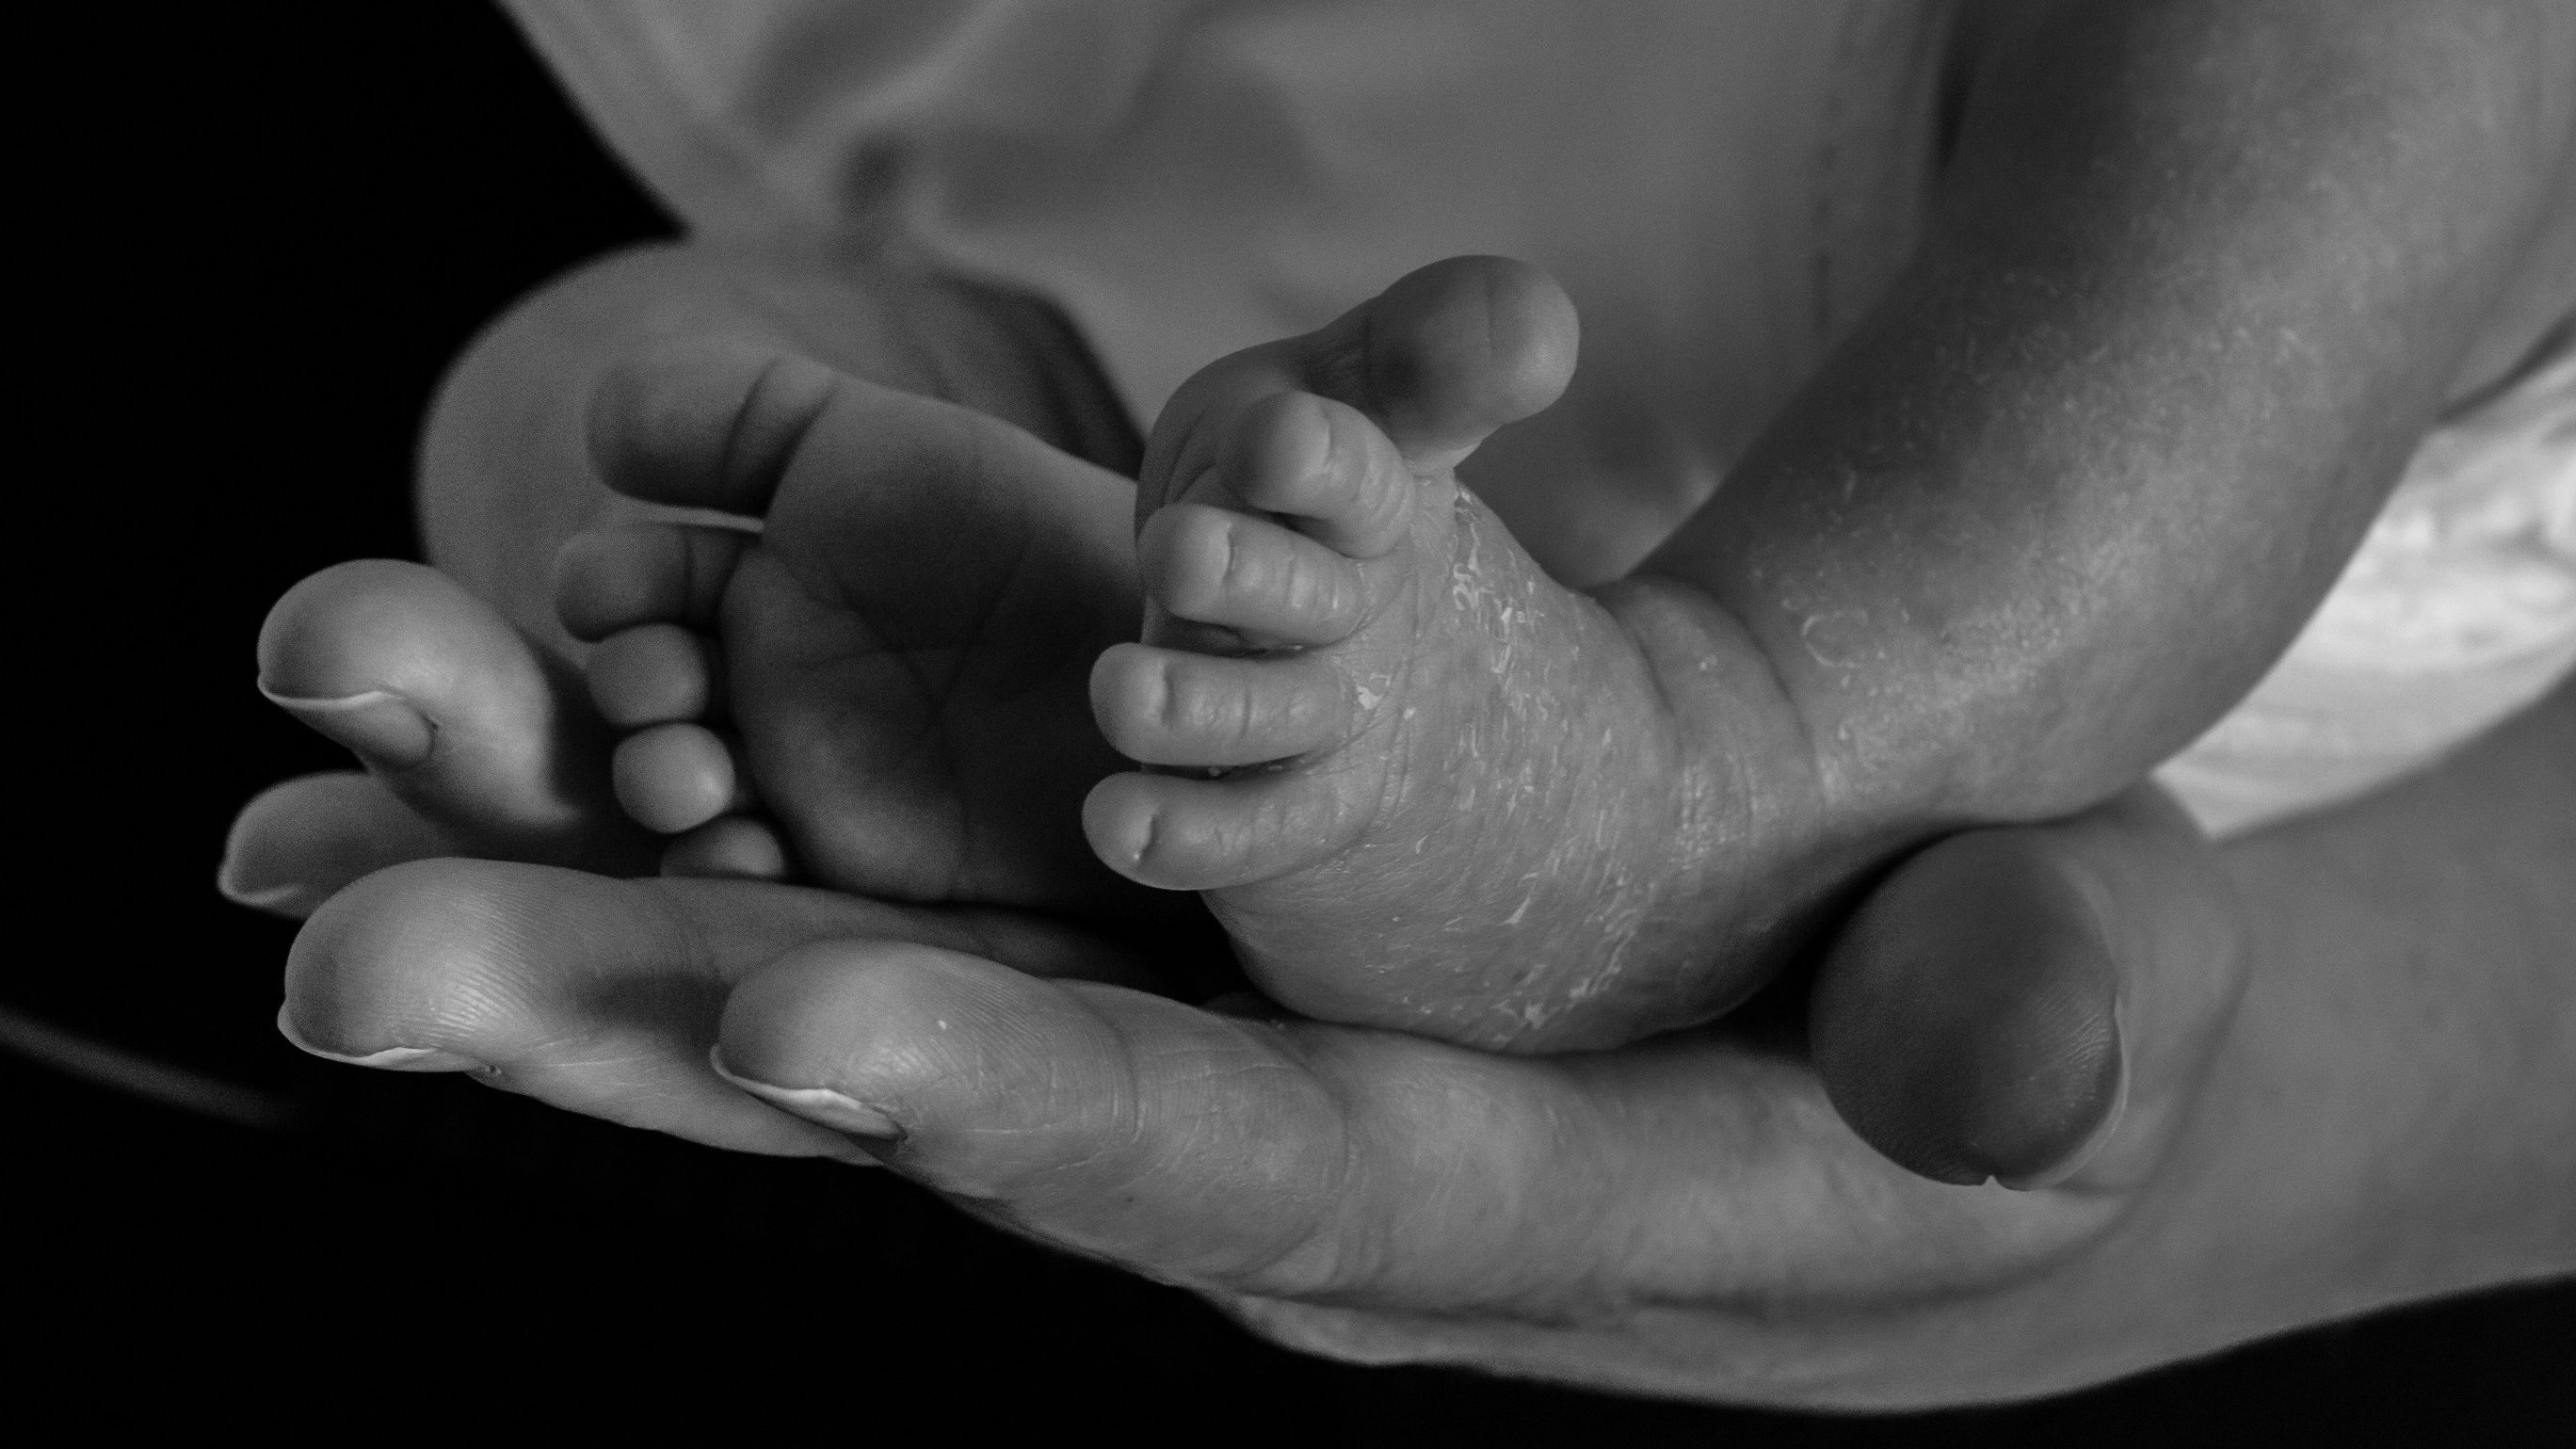 black and white close-up photgraph of an adult holding an infants feet in their hands